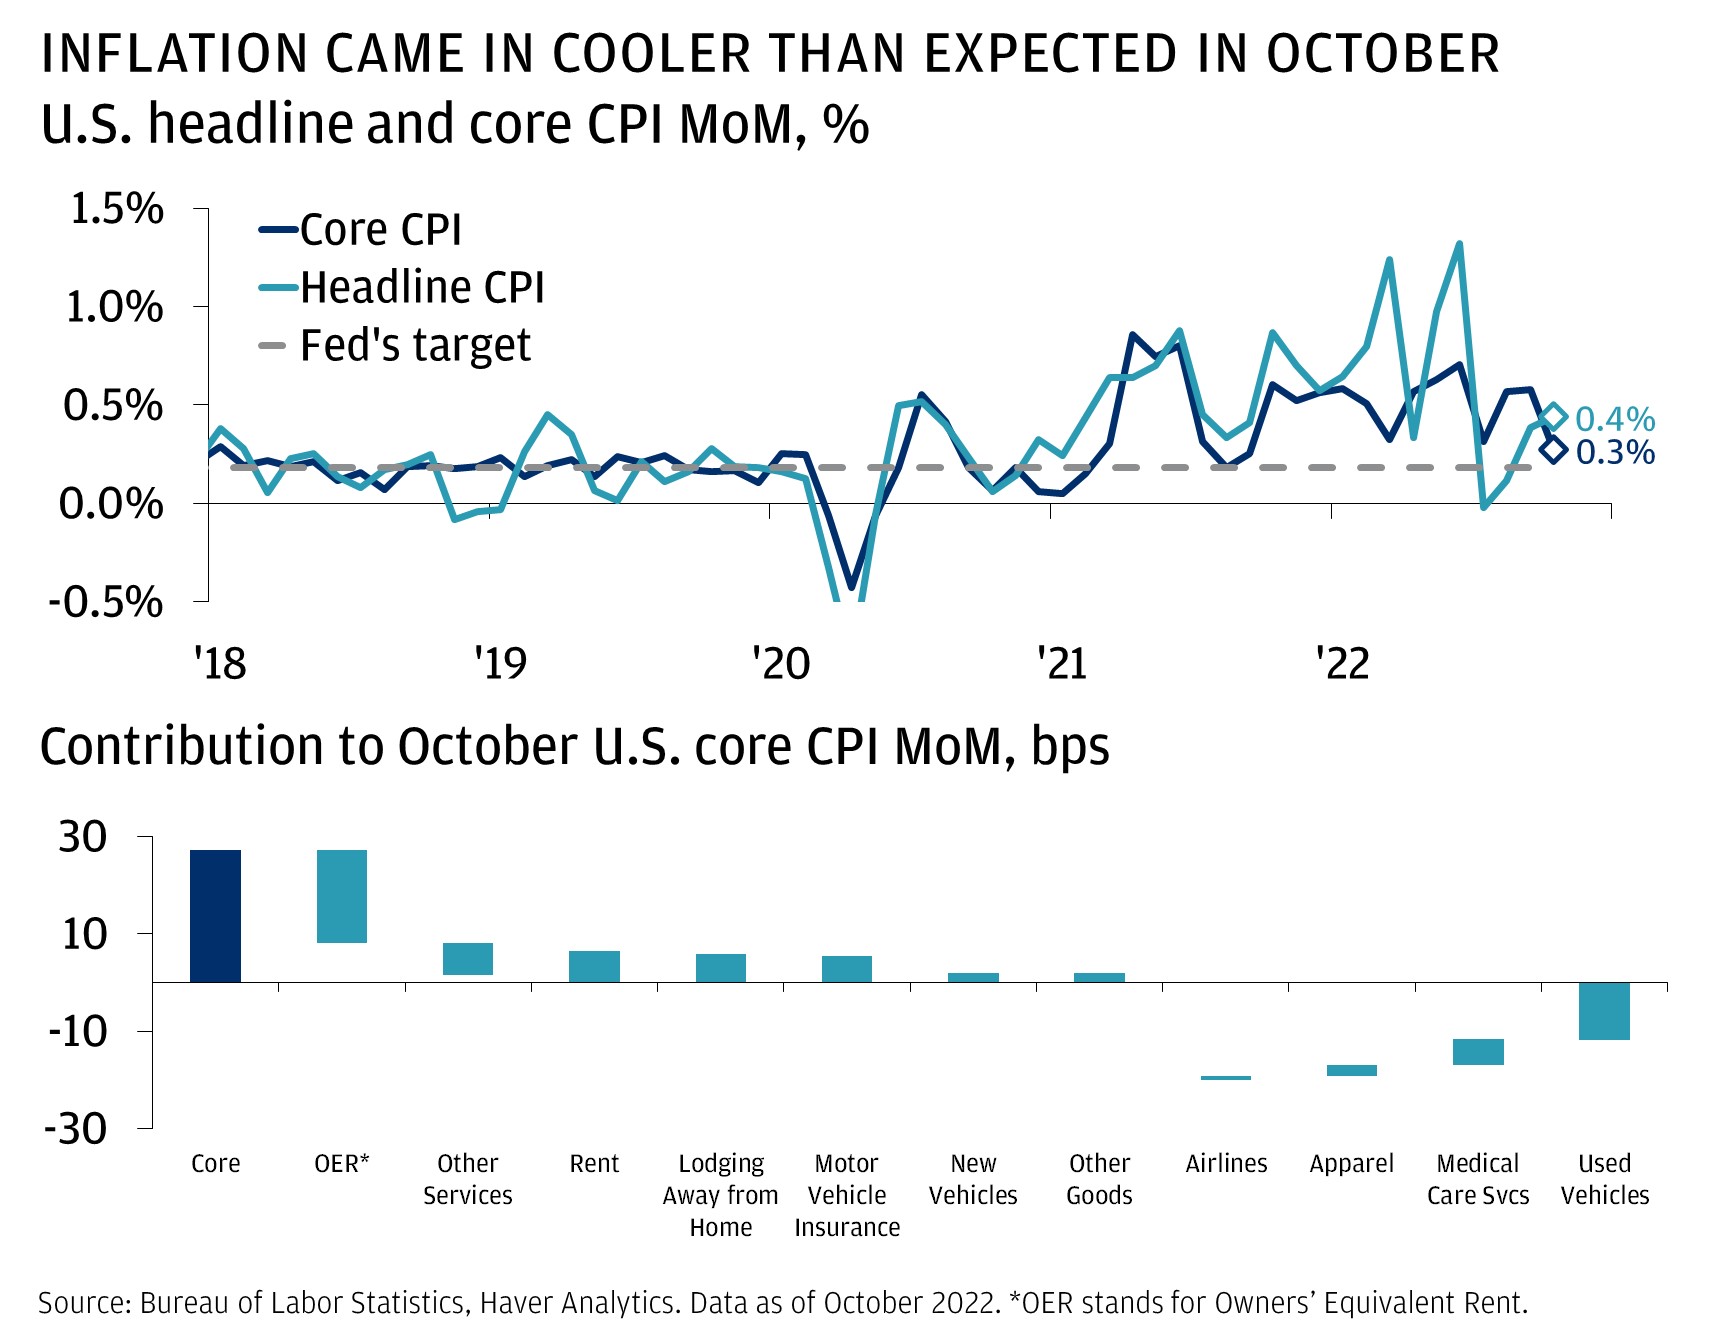 The top chart compares the month-over-month U.S. core CPI to U.S. headline CPI reading as well as the Fed’s target rate. The bottom chart shows sector contribution to October U.S. core CPI in basis points (bps).